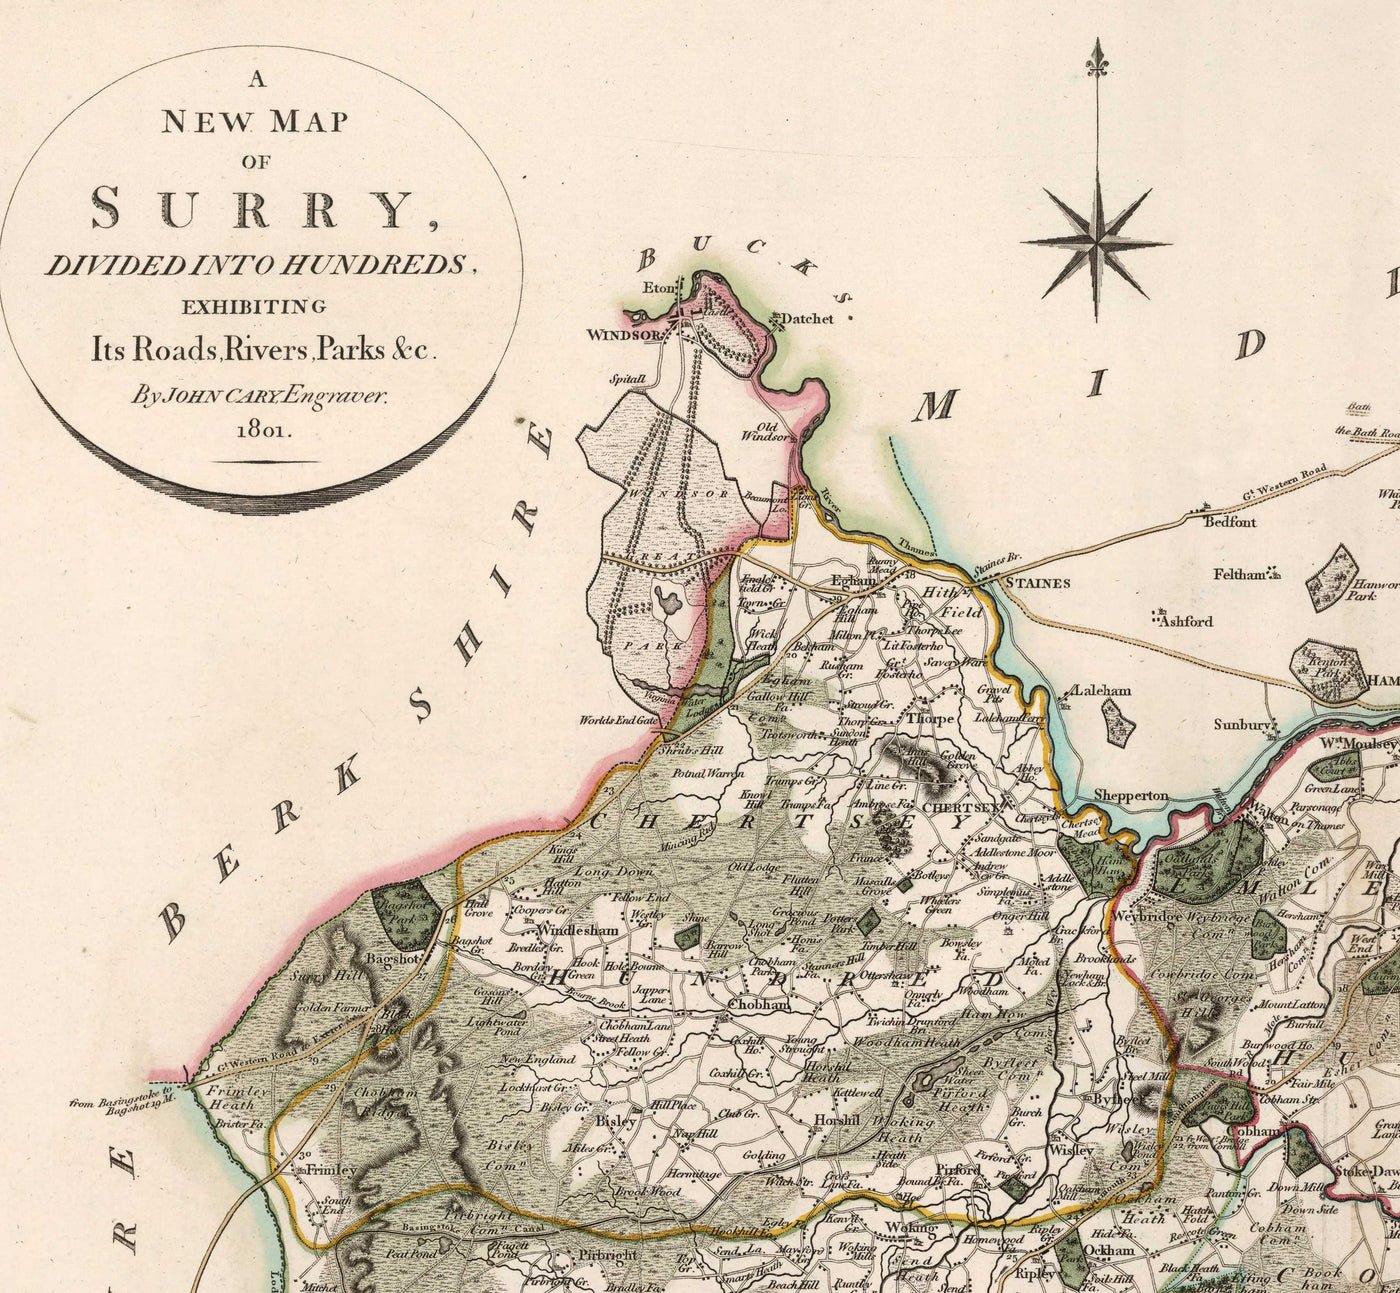 Old Map of Surrey in 1801 by John Cary - Guildford, Haslemere, Streatham, Reigate, Dorking